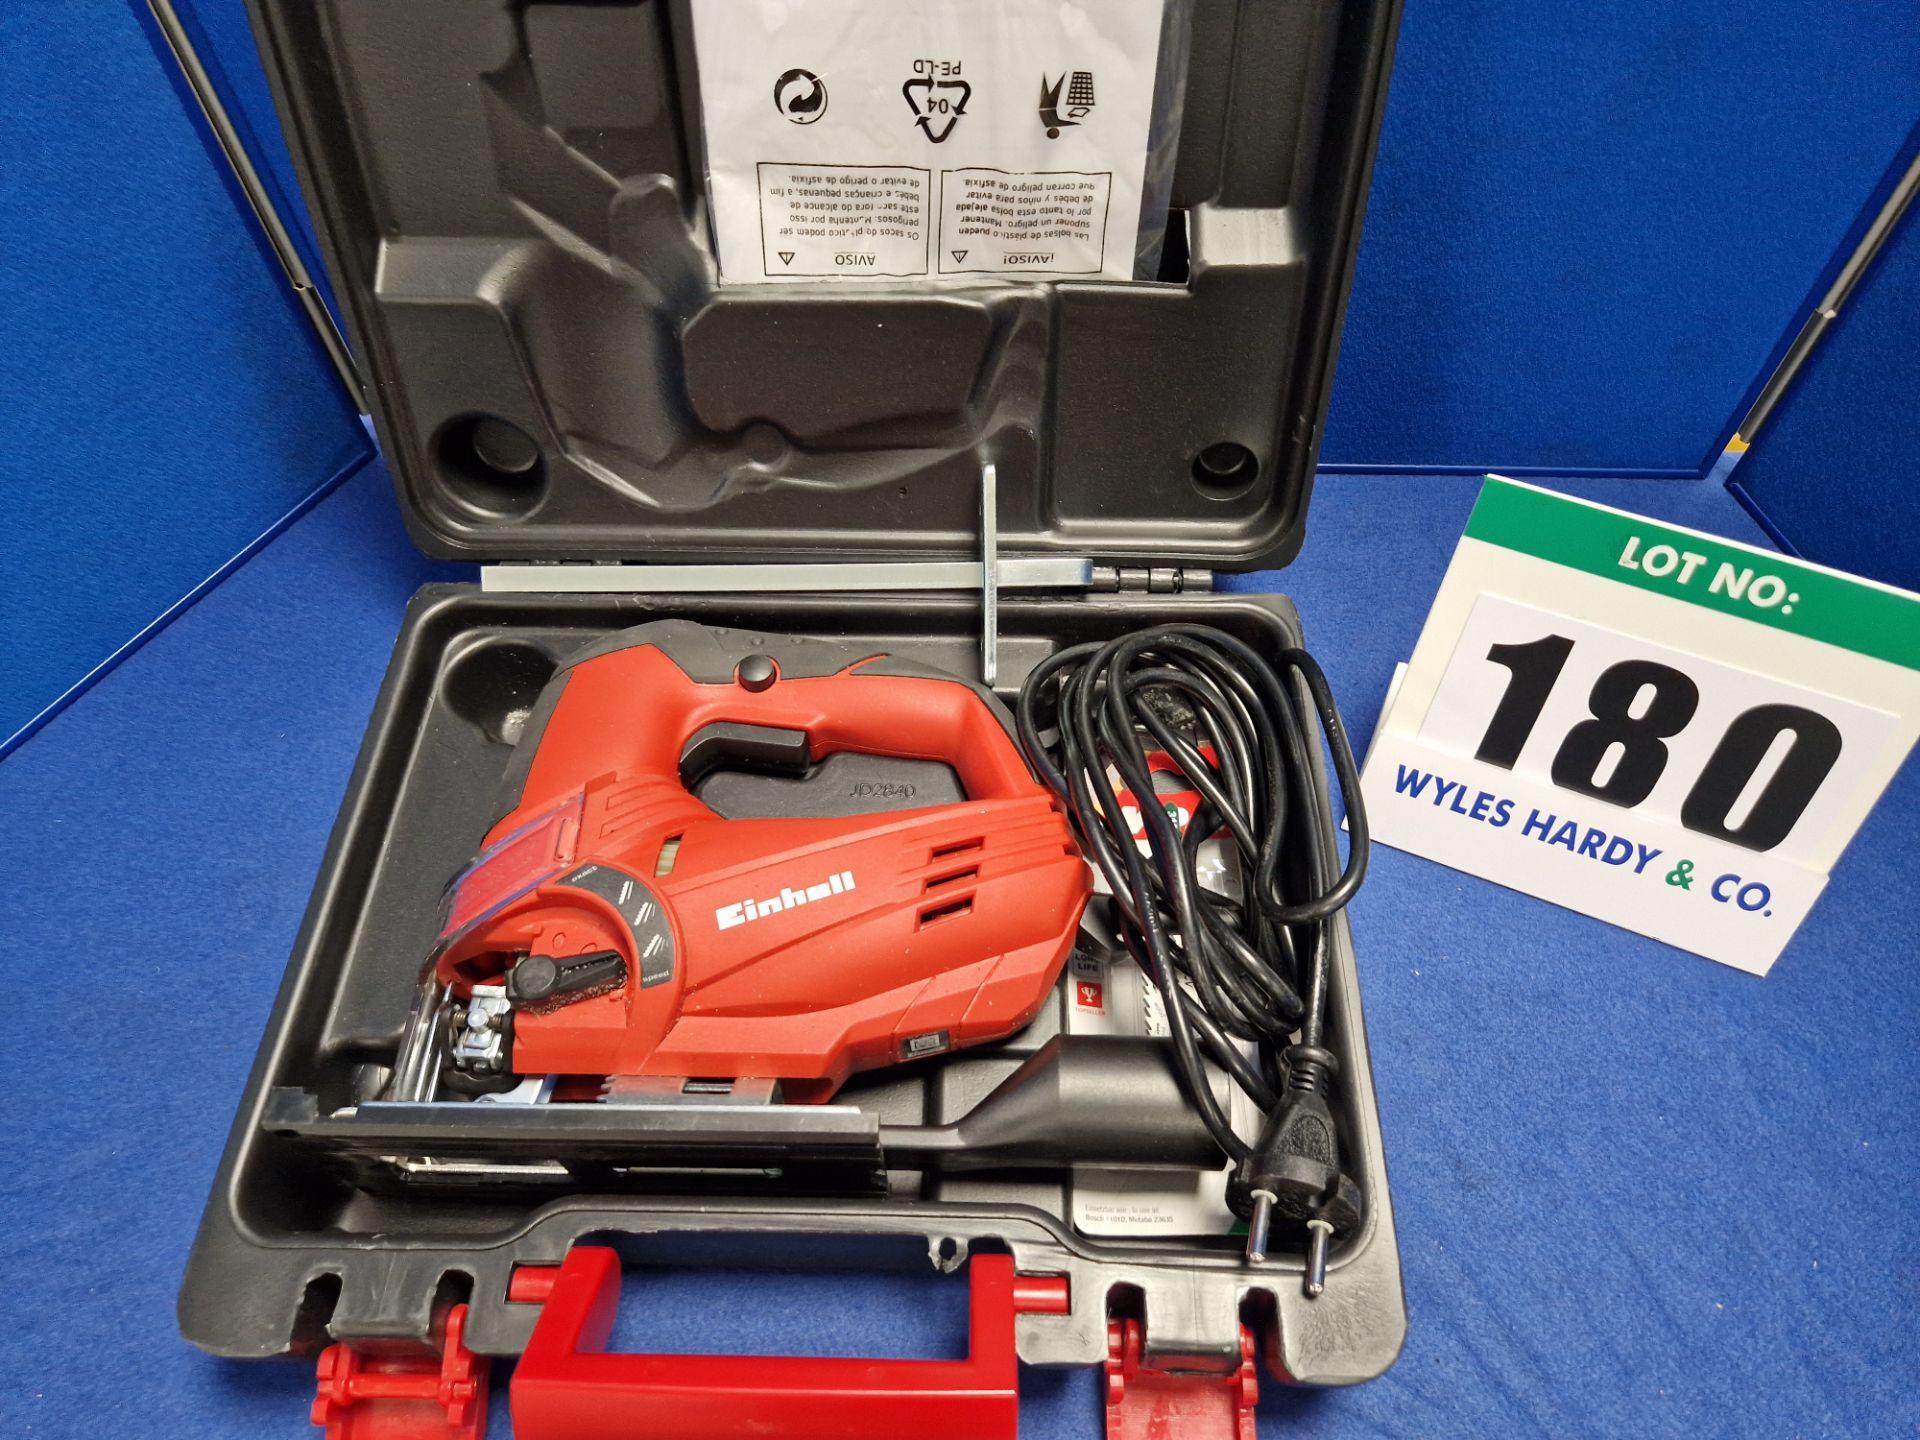 One EINHELL 240V AC Corded Electric Variable Speed Jigsaw with Blade Guard, Extraction Vent and